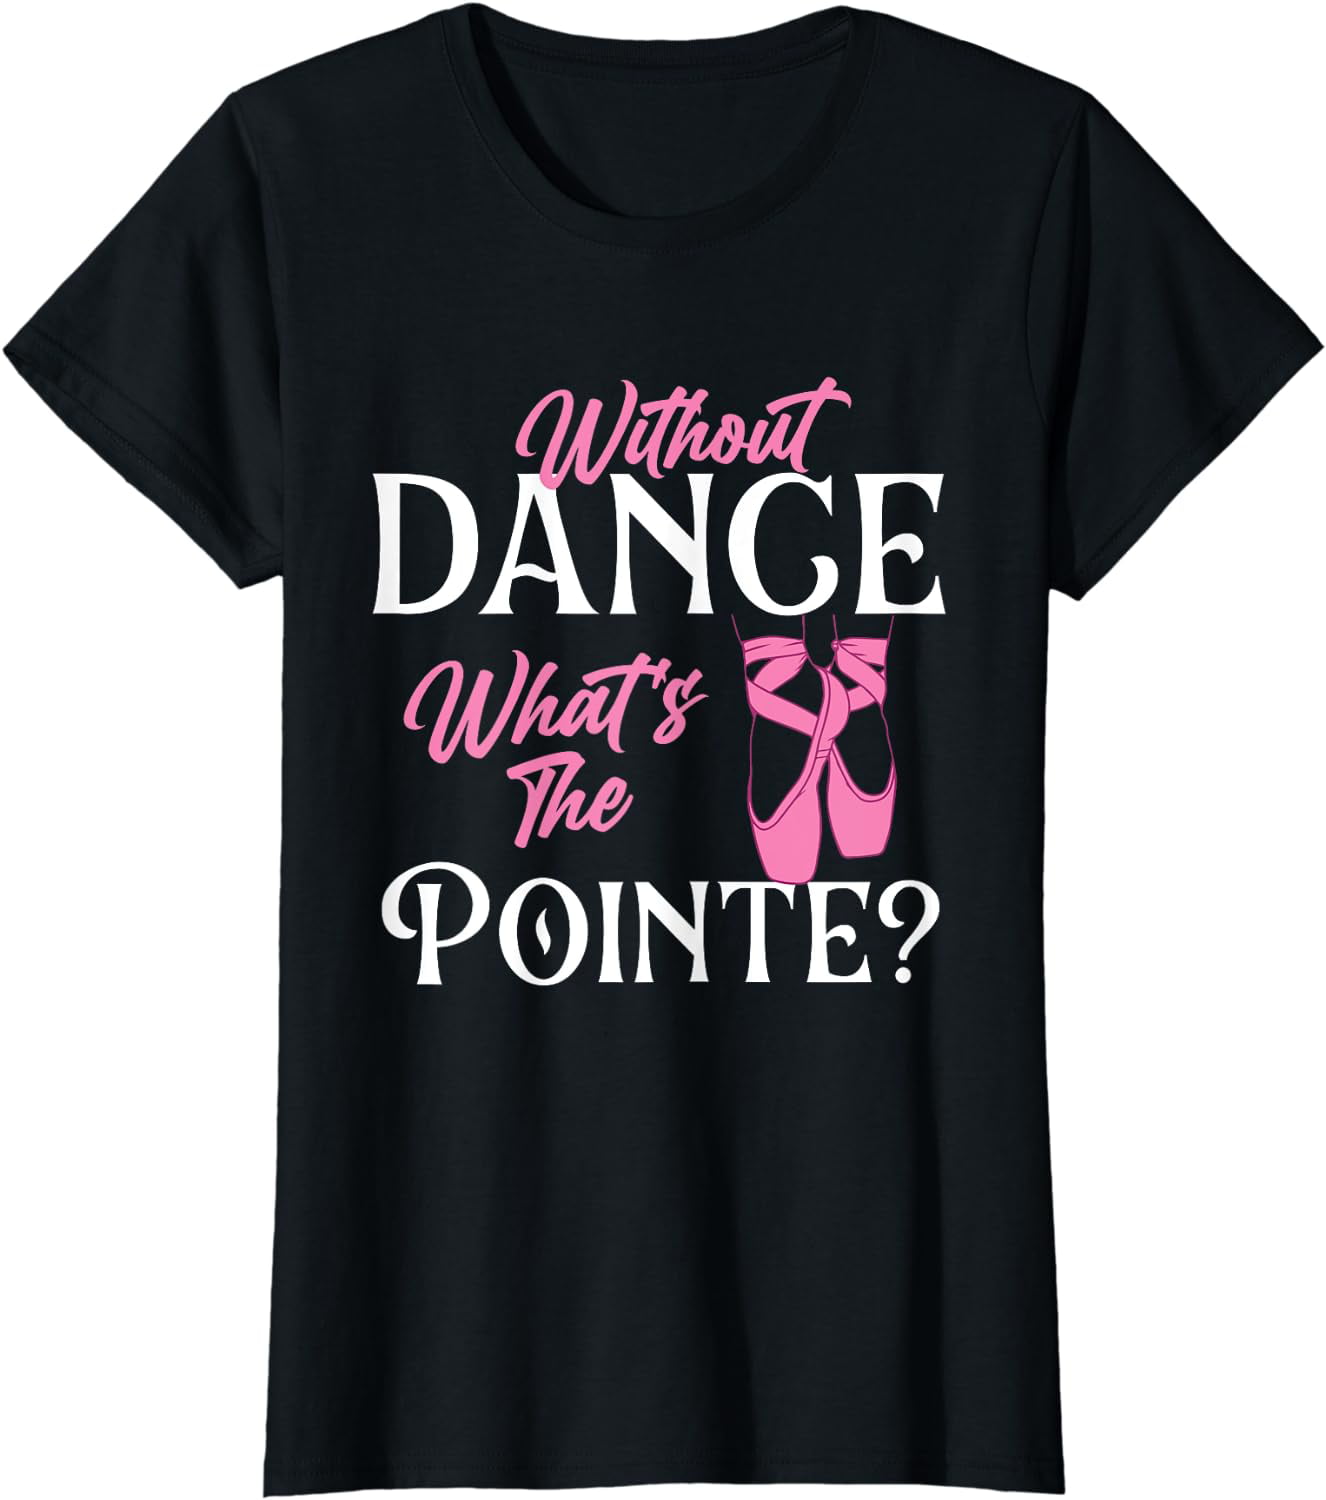 Without Dance What's the Pointe - Ballet Dancer Ballerina T-Shirt ...